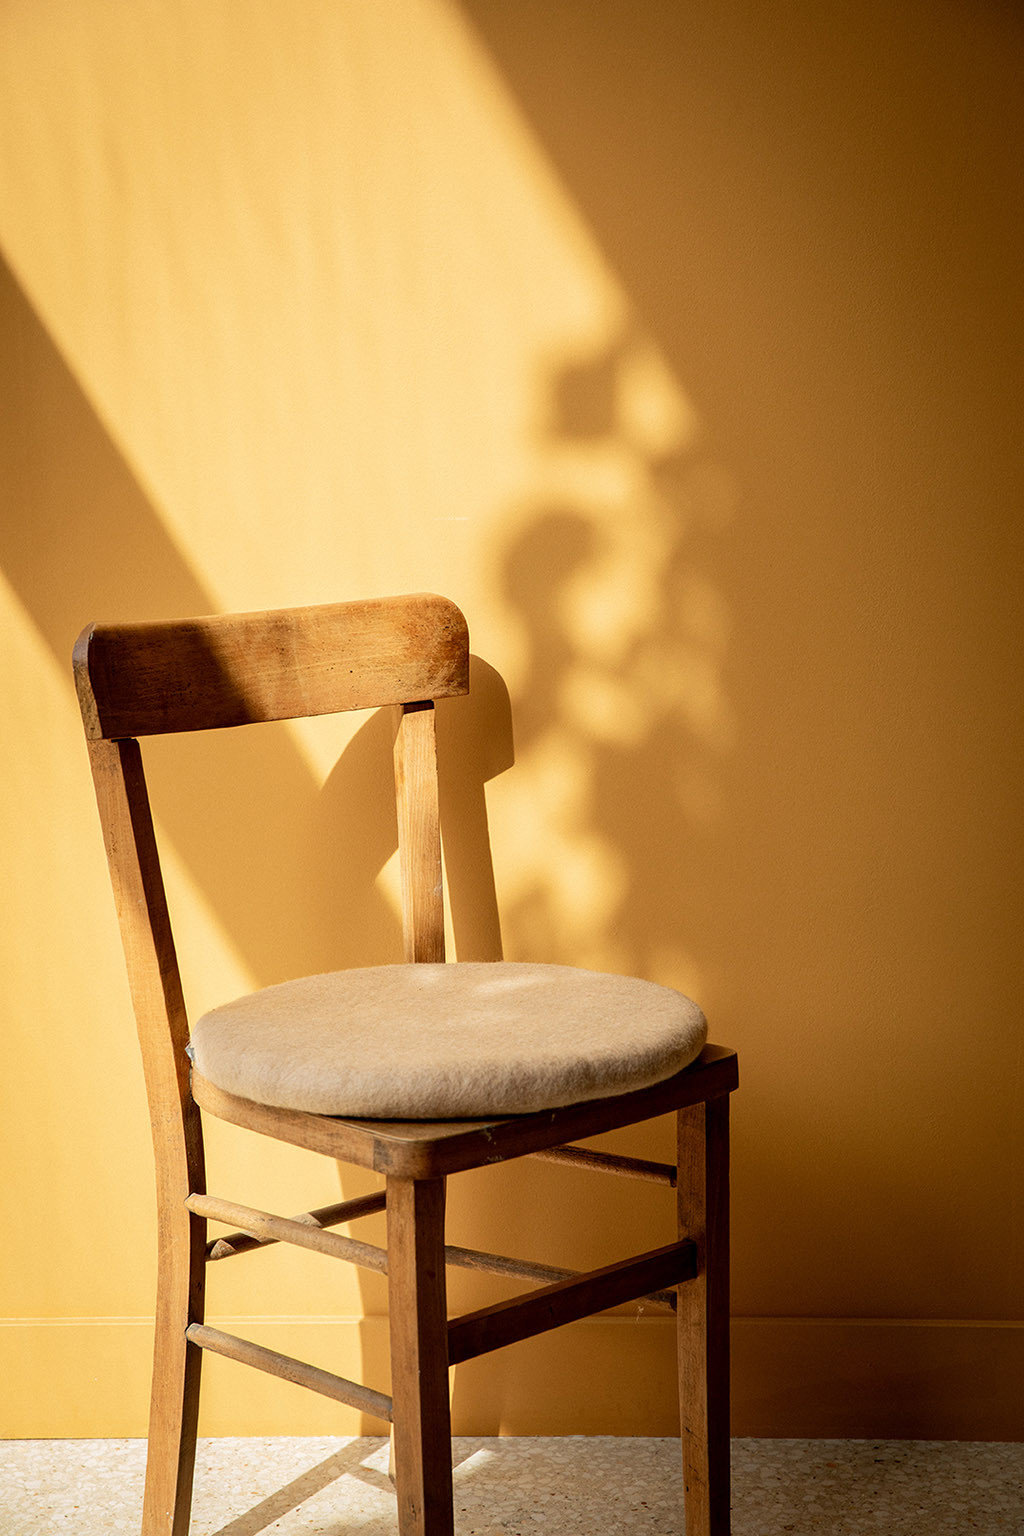 Chair and its seat in boiled wool